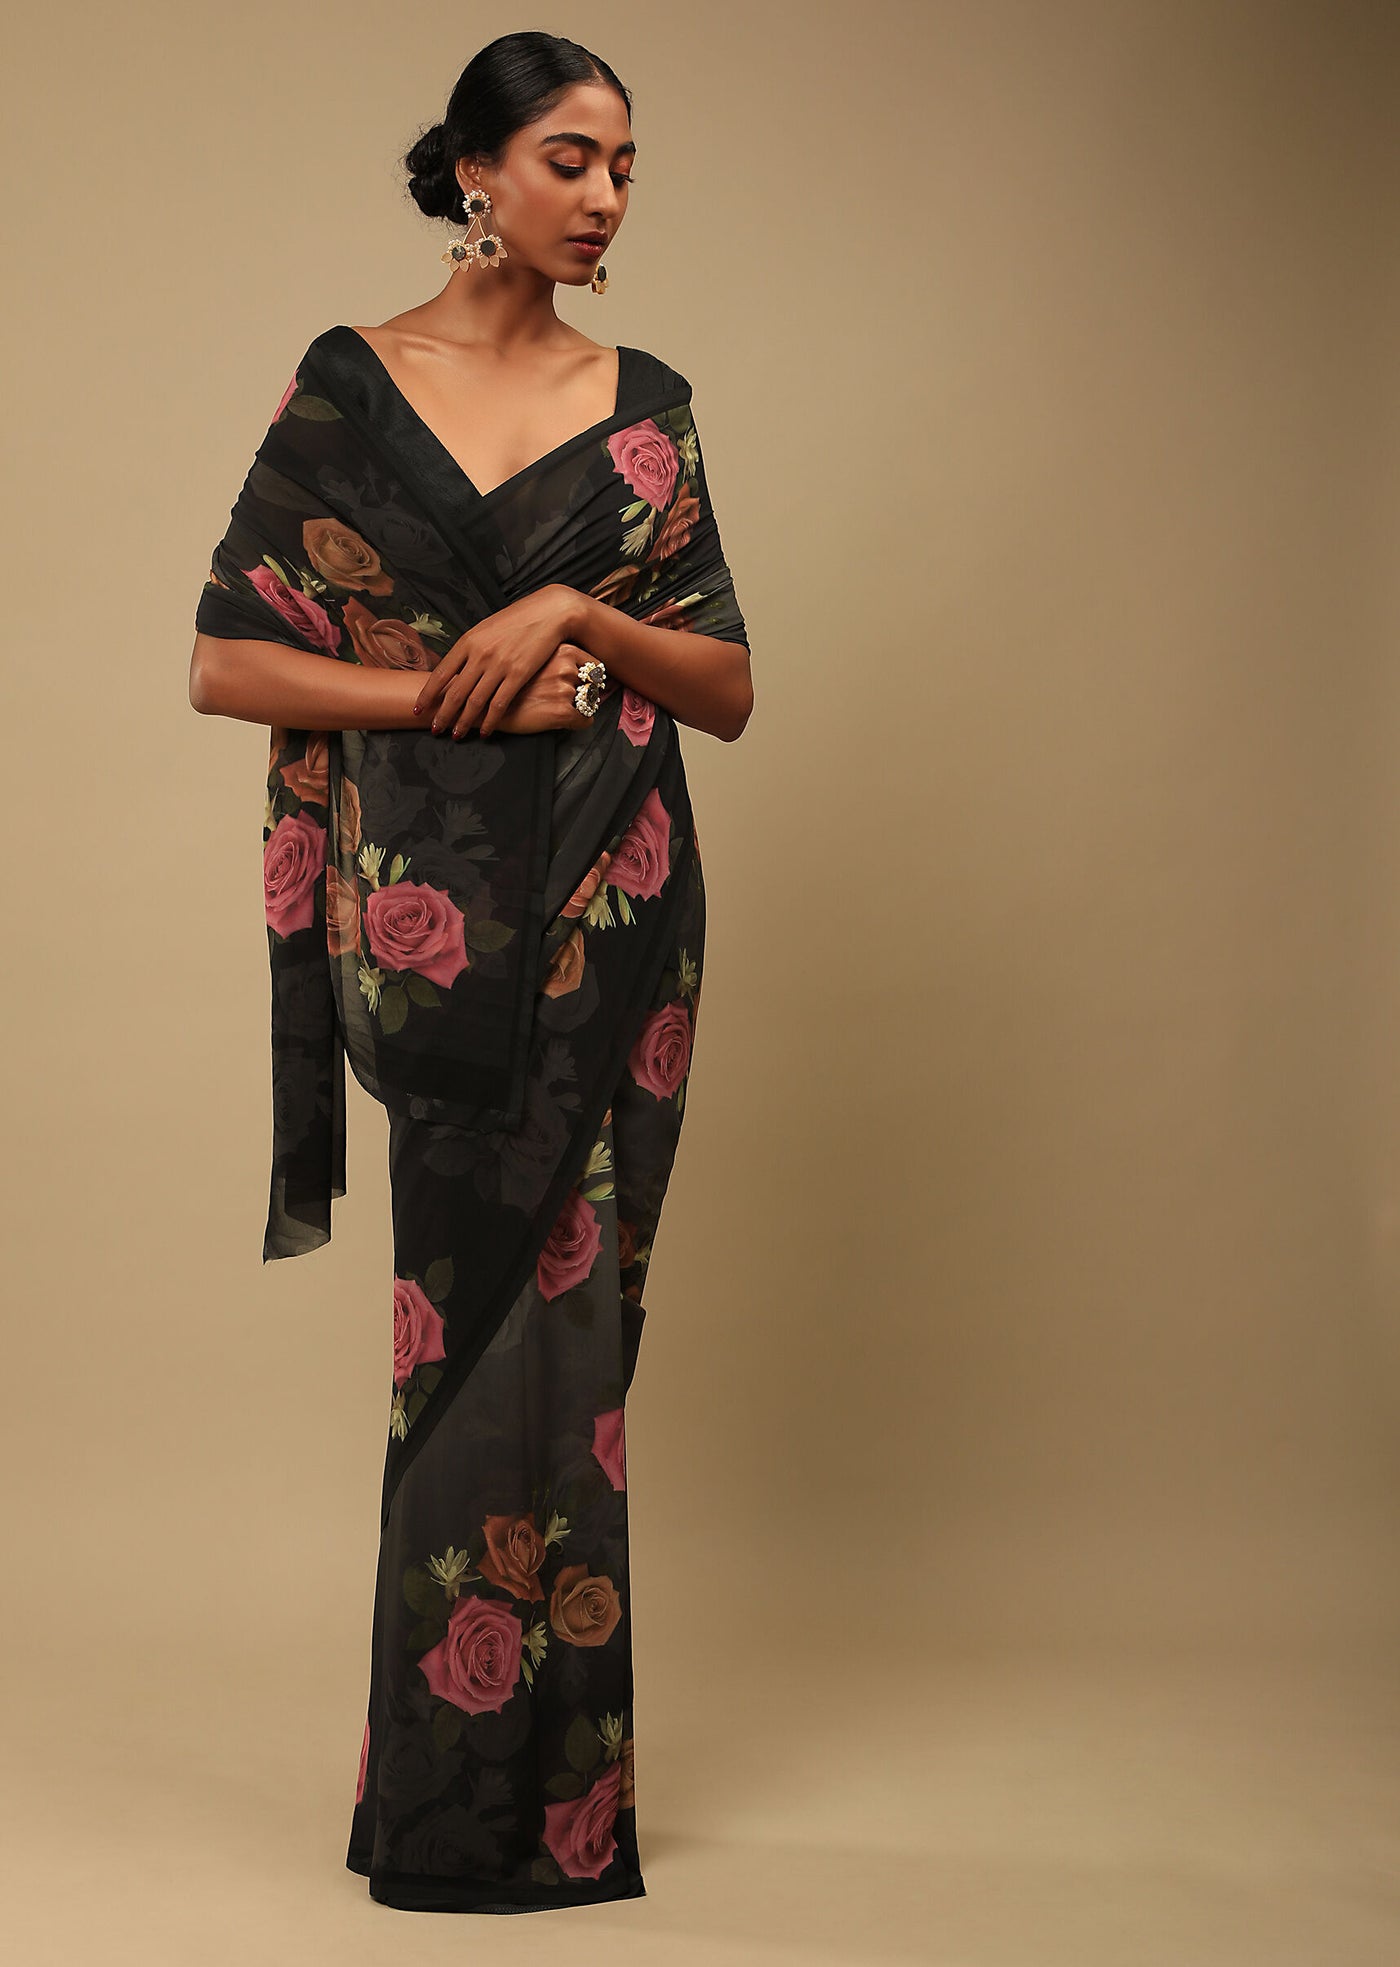 Black Rose Print Saree - Indian Clothing in Denver, CO, Aurora, CO, Boulder, CO, Fort Collins, CO, Colorado Springs, CO, Parker, CO, Highlands Ranch, CO, Cherry Creek, CO, Centennial, CO, and Longmont, CO. Nationwide shipping USA - India Fashion X